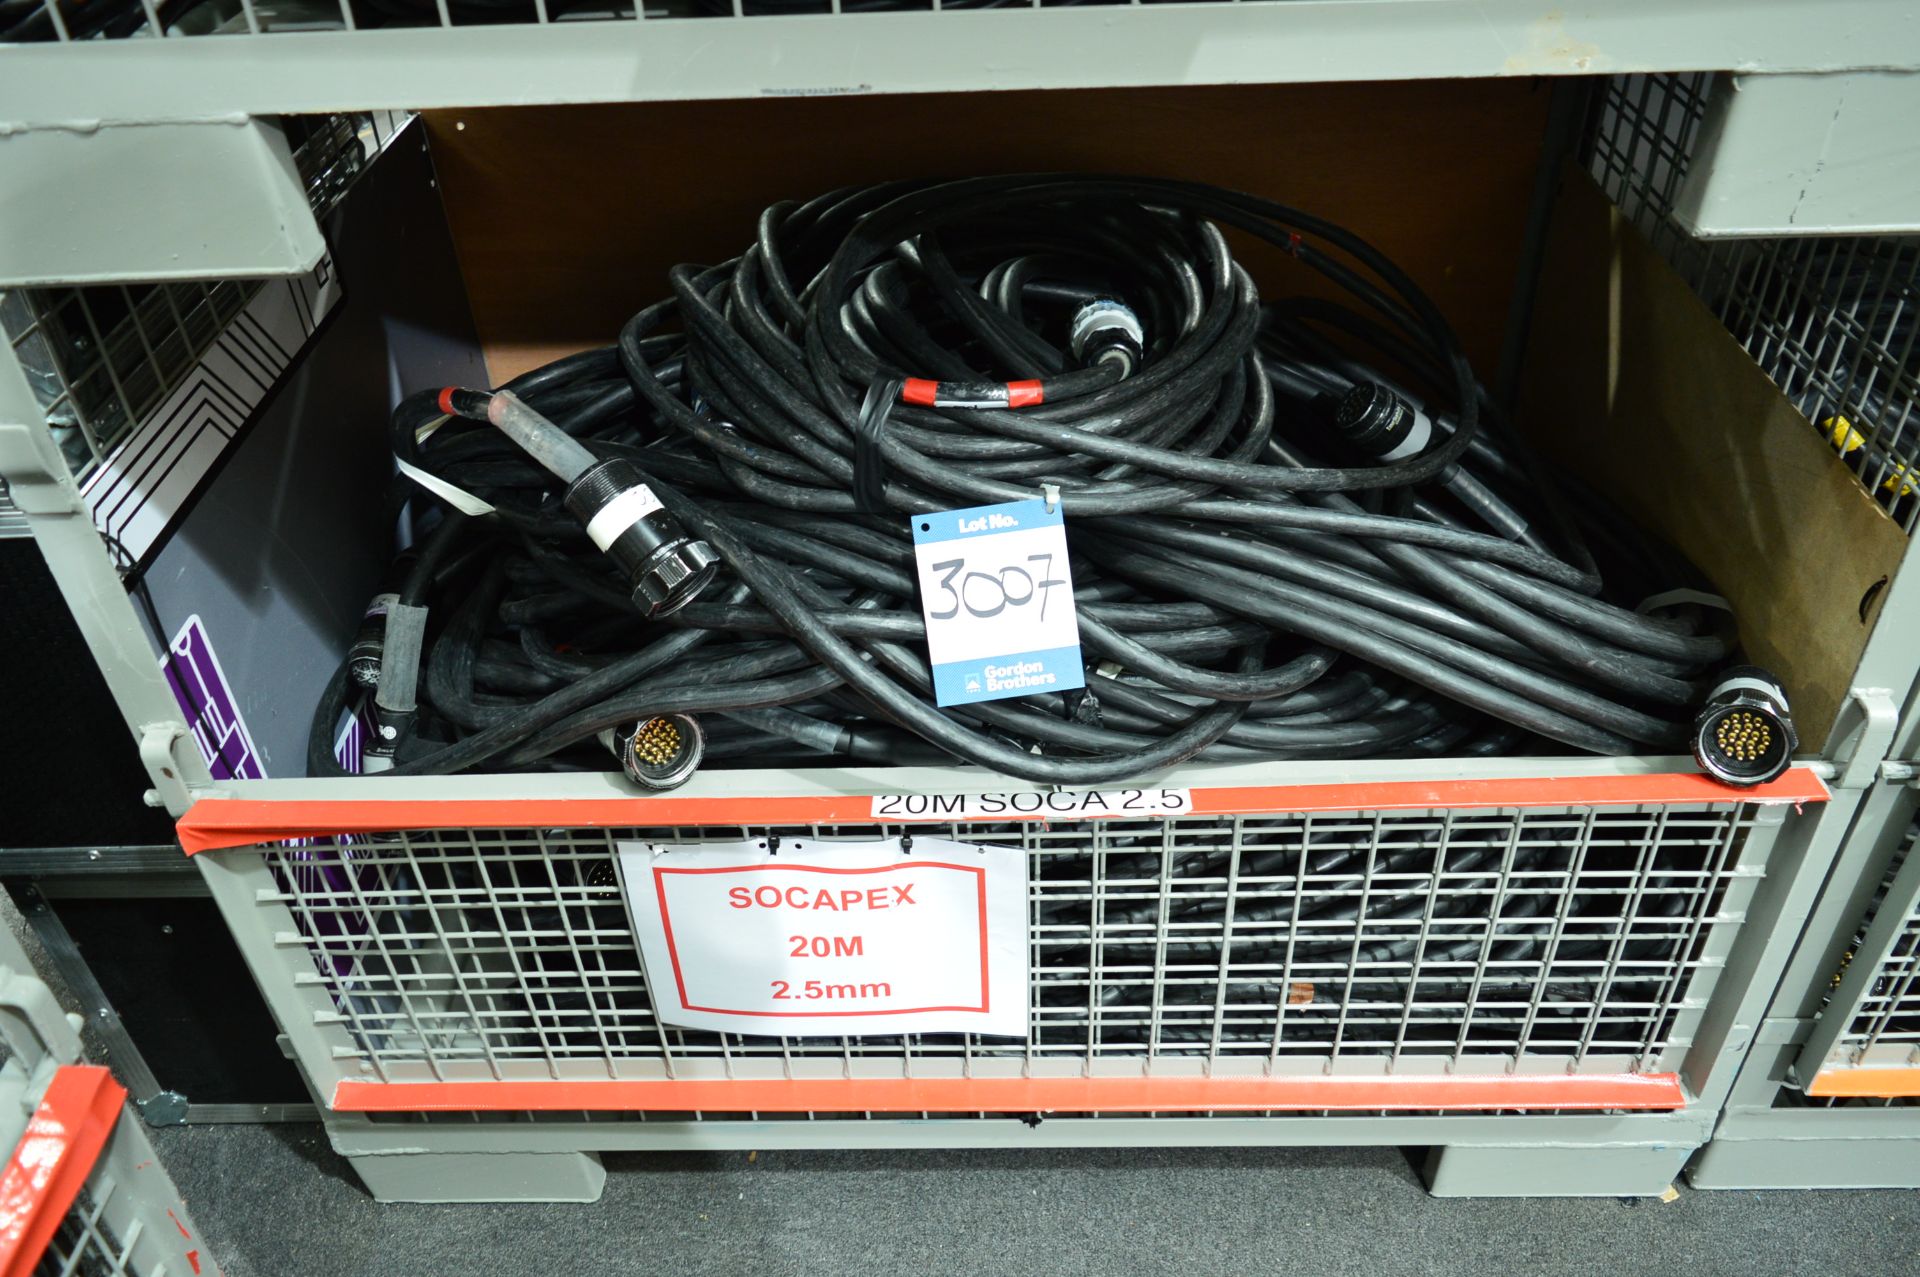 Quantity of 20m / 2.5mm Socapex cables (stillage not included): Unit 500, Eckersall Road, Birmingham